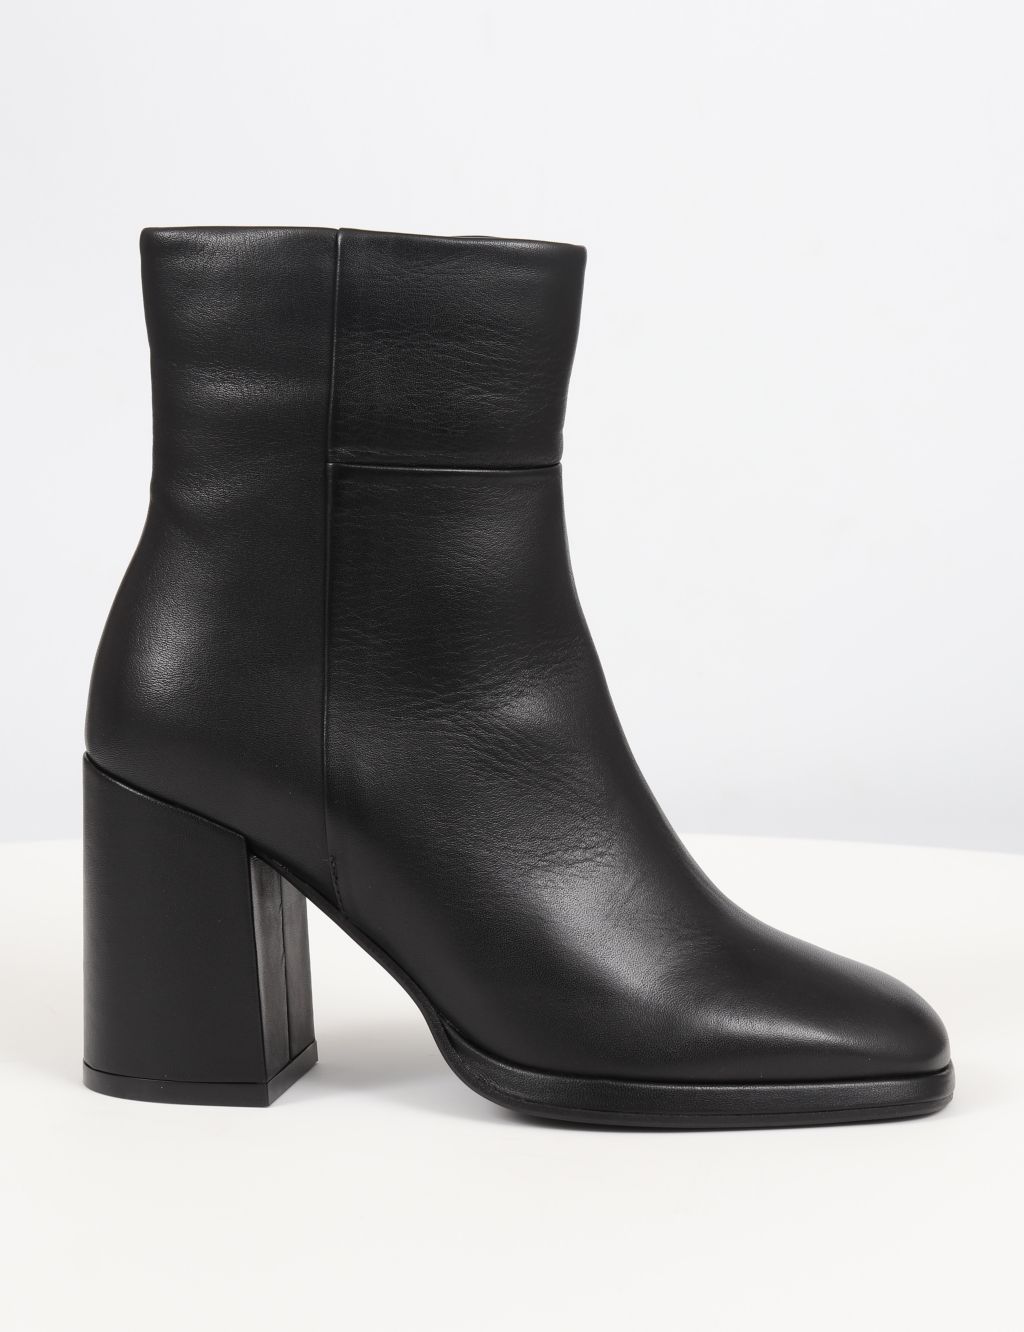 Leather Block Heel Square Toe Ankle Boots image 2